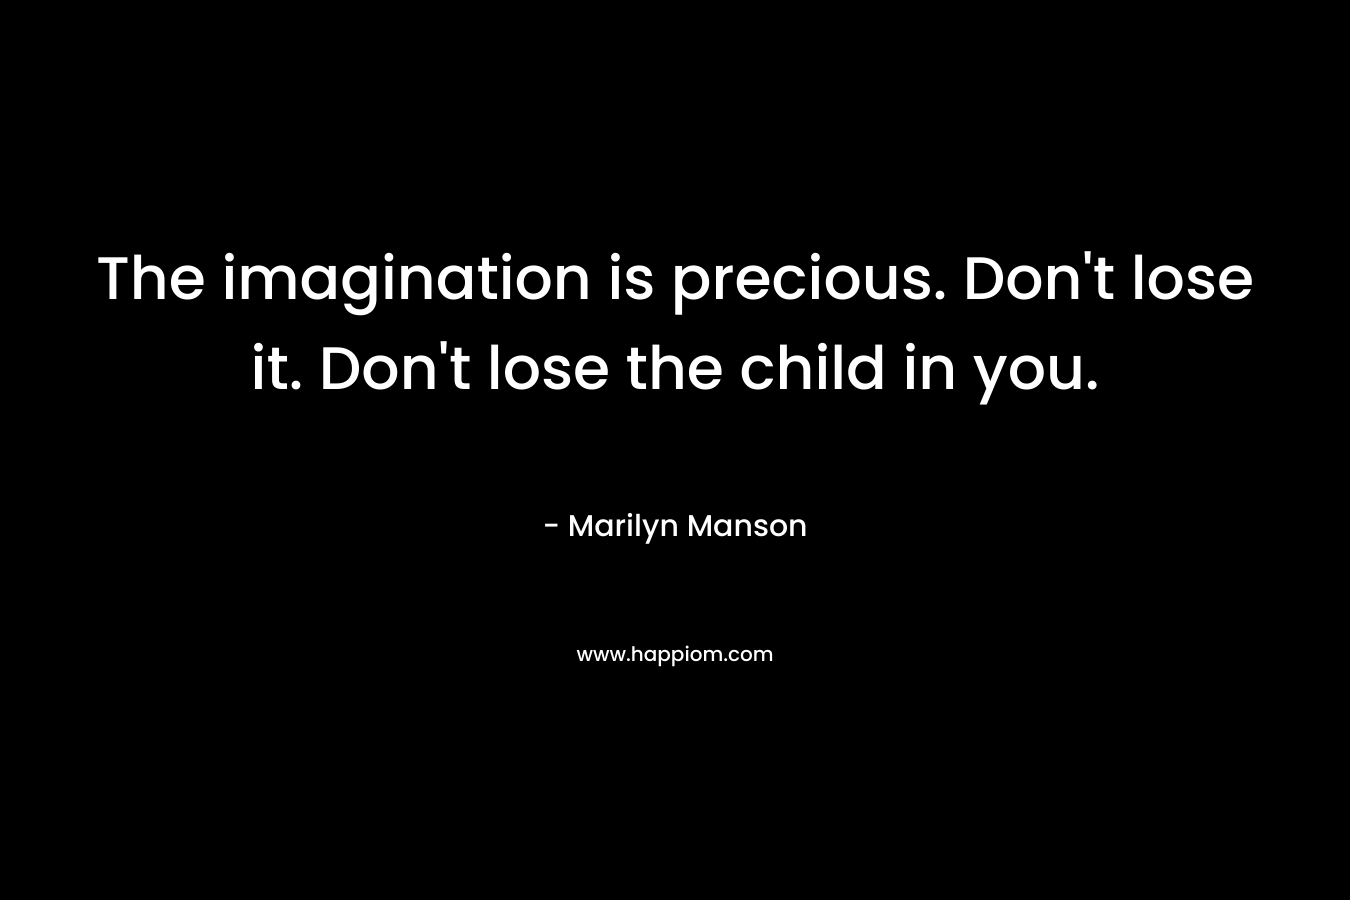 The imagination is precious. Don’t lose it. Don’t lose the child in you. – Marilyn Manson